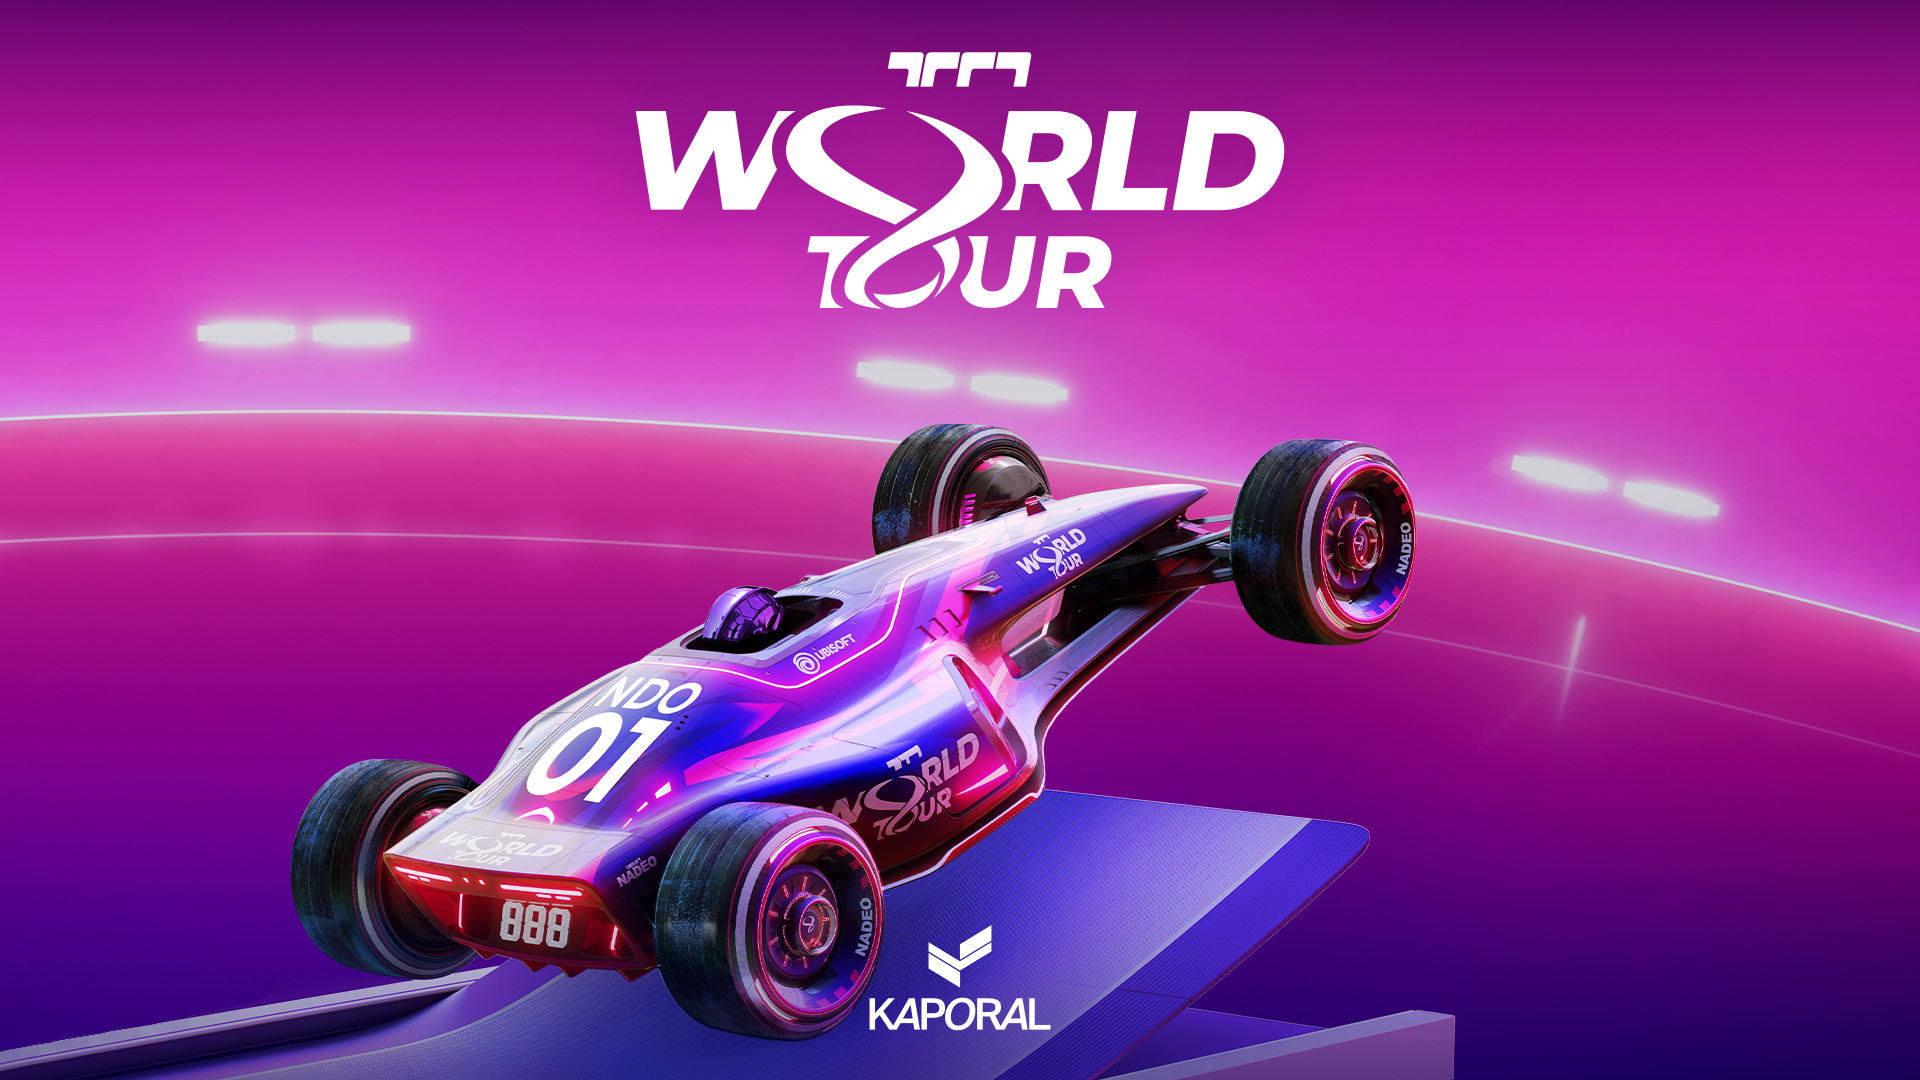 Introducing the Trackmania World Tour 2023